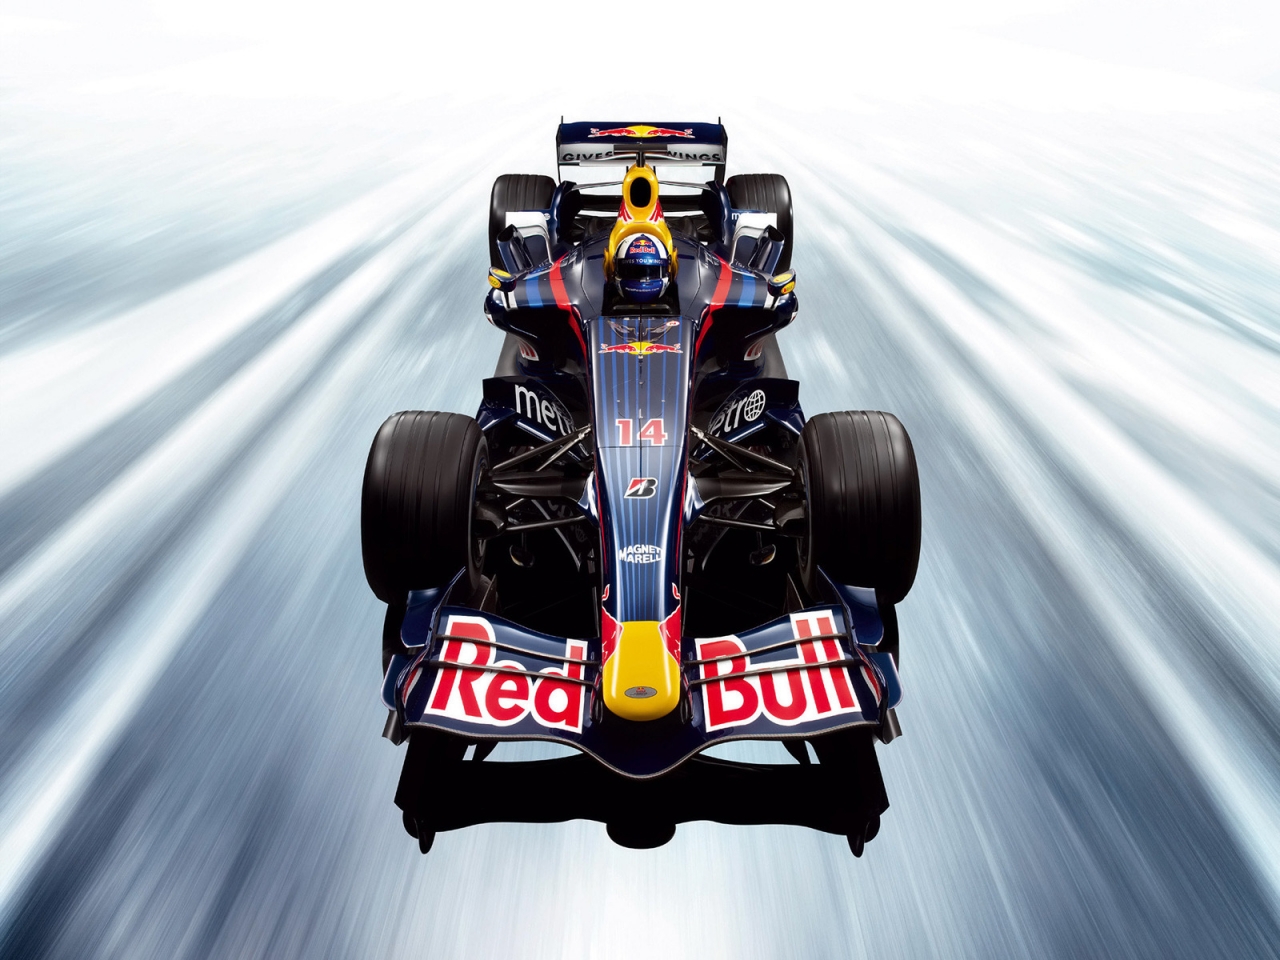 Red Bull RB3 F1 Studio Front for 1280 x 960 resolution